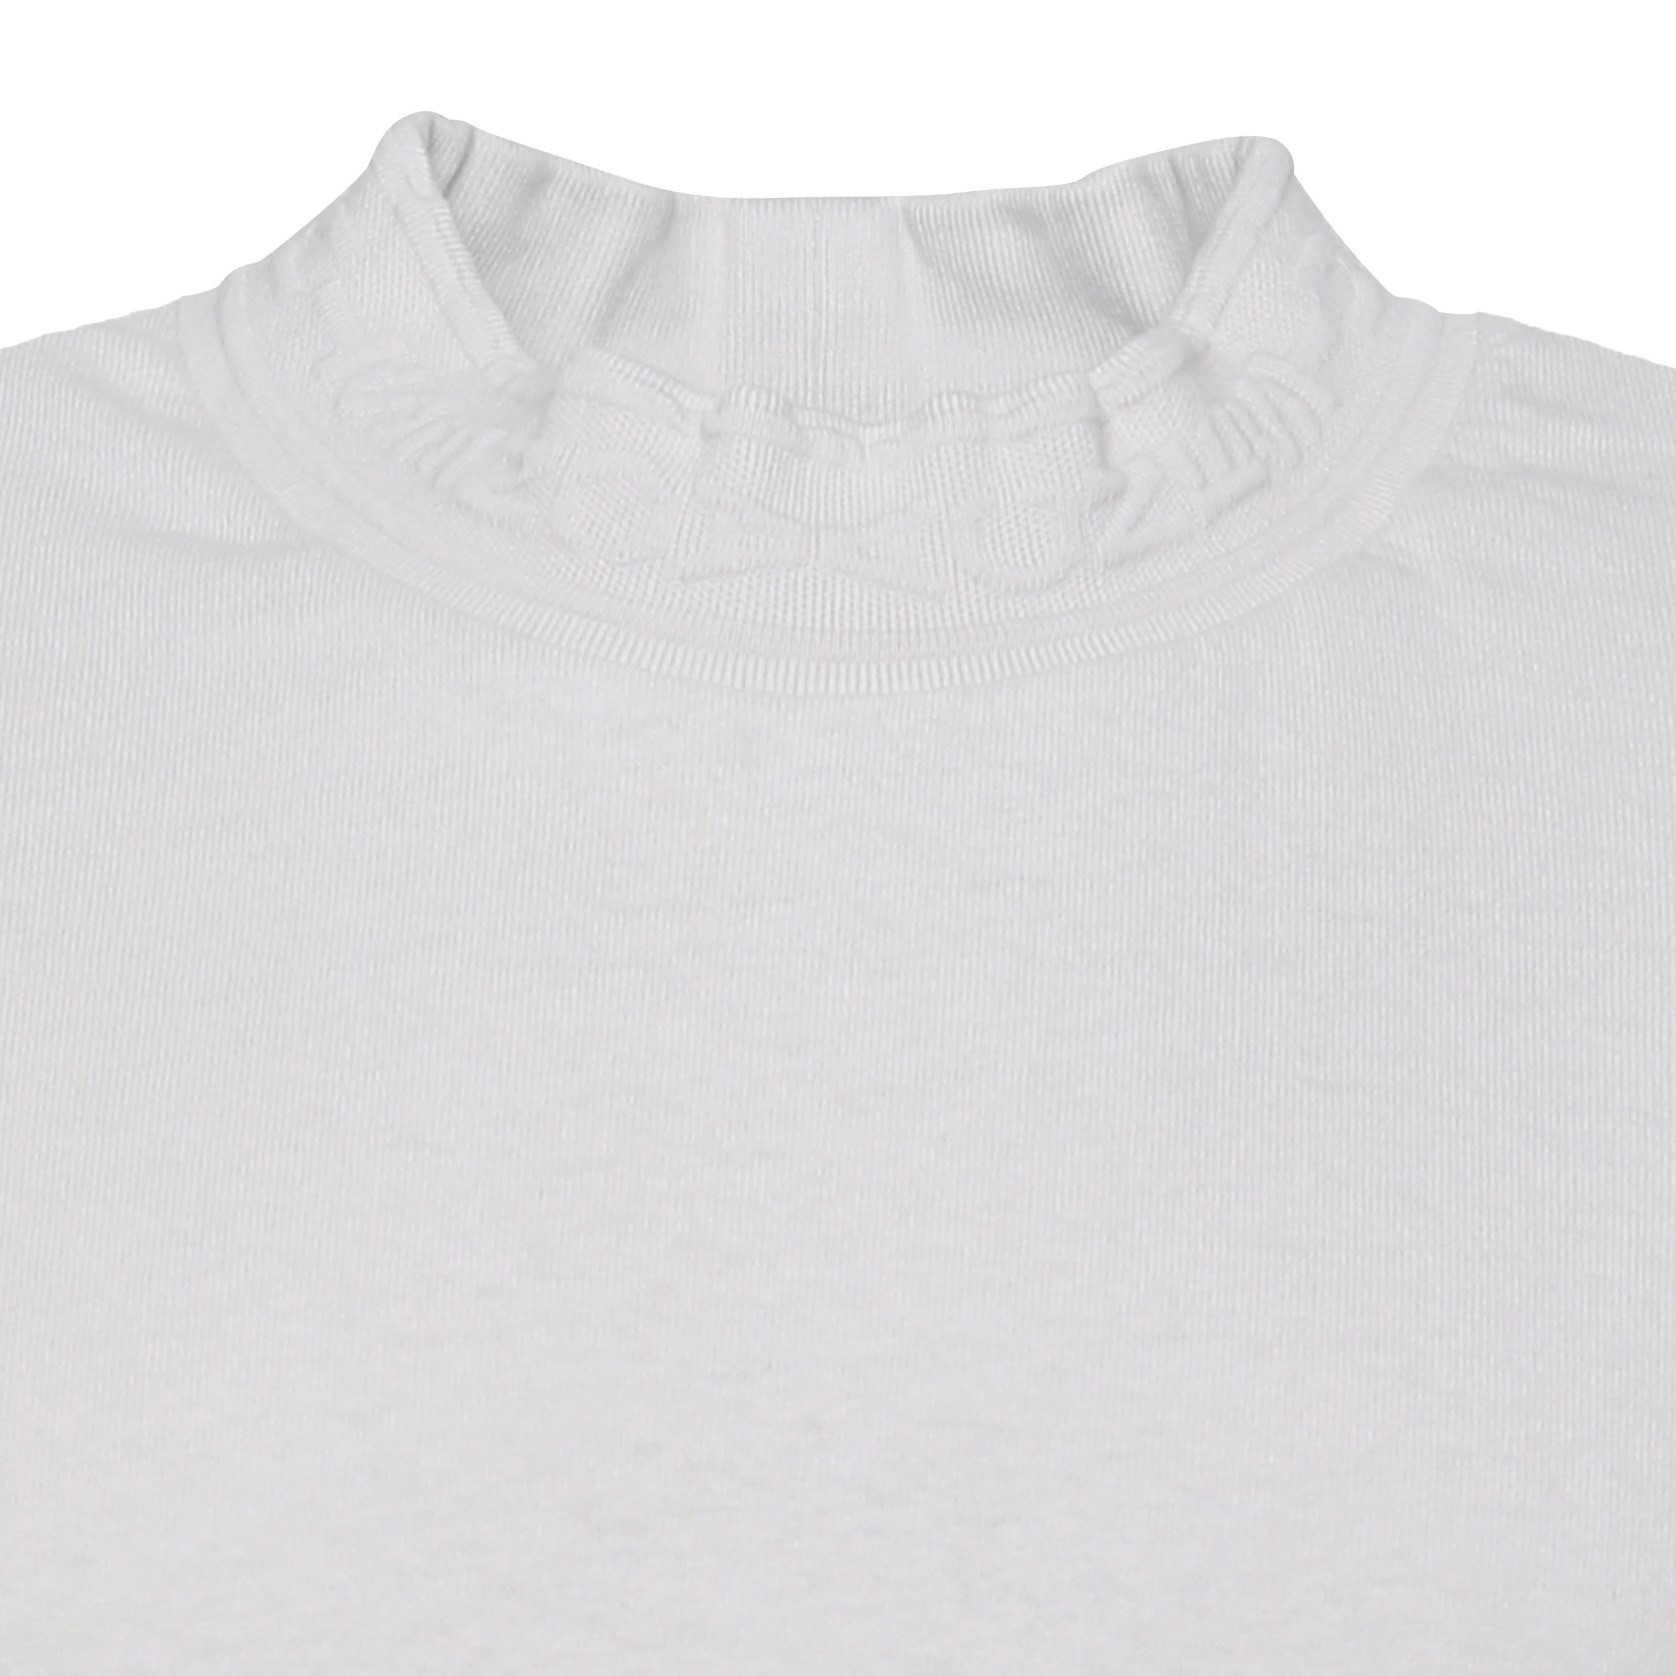 Acne Studios Loose Fit Logo Tape T-Shirt in Cold White XL